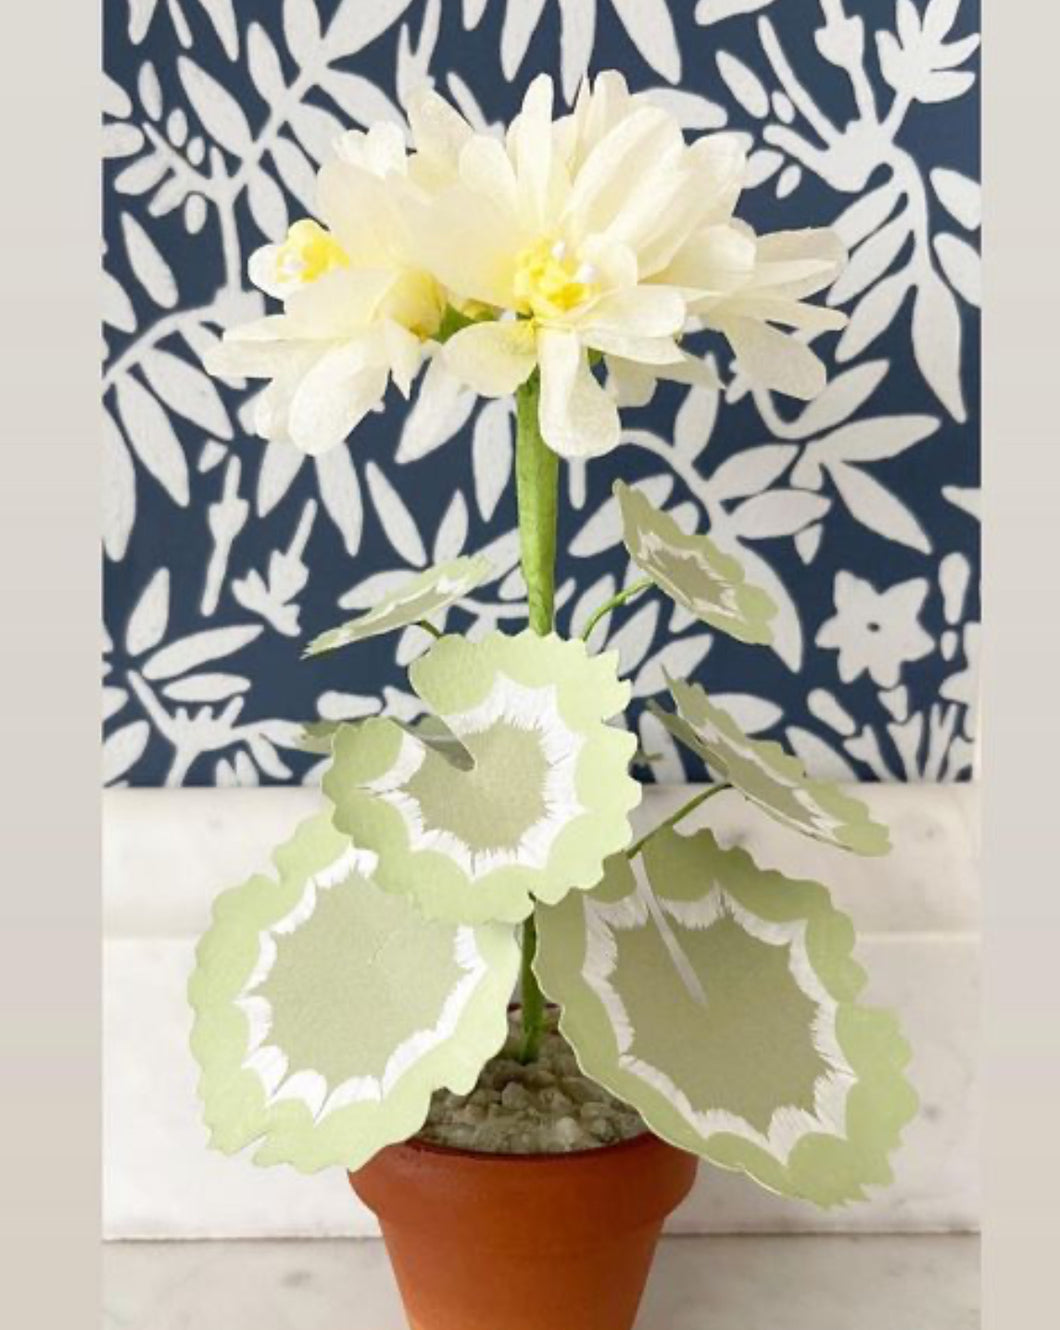 Paper Geranium - Small yellow blossom with moss and mint leaves